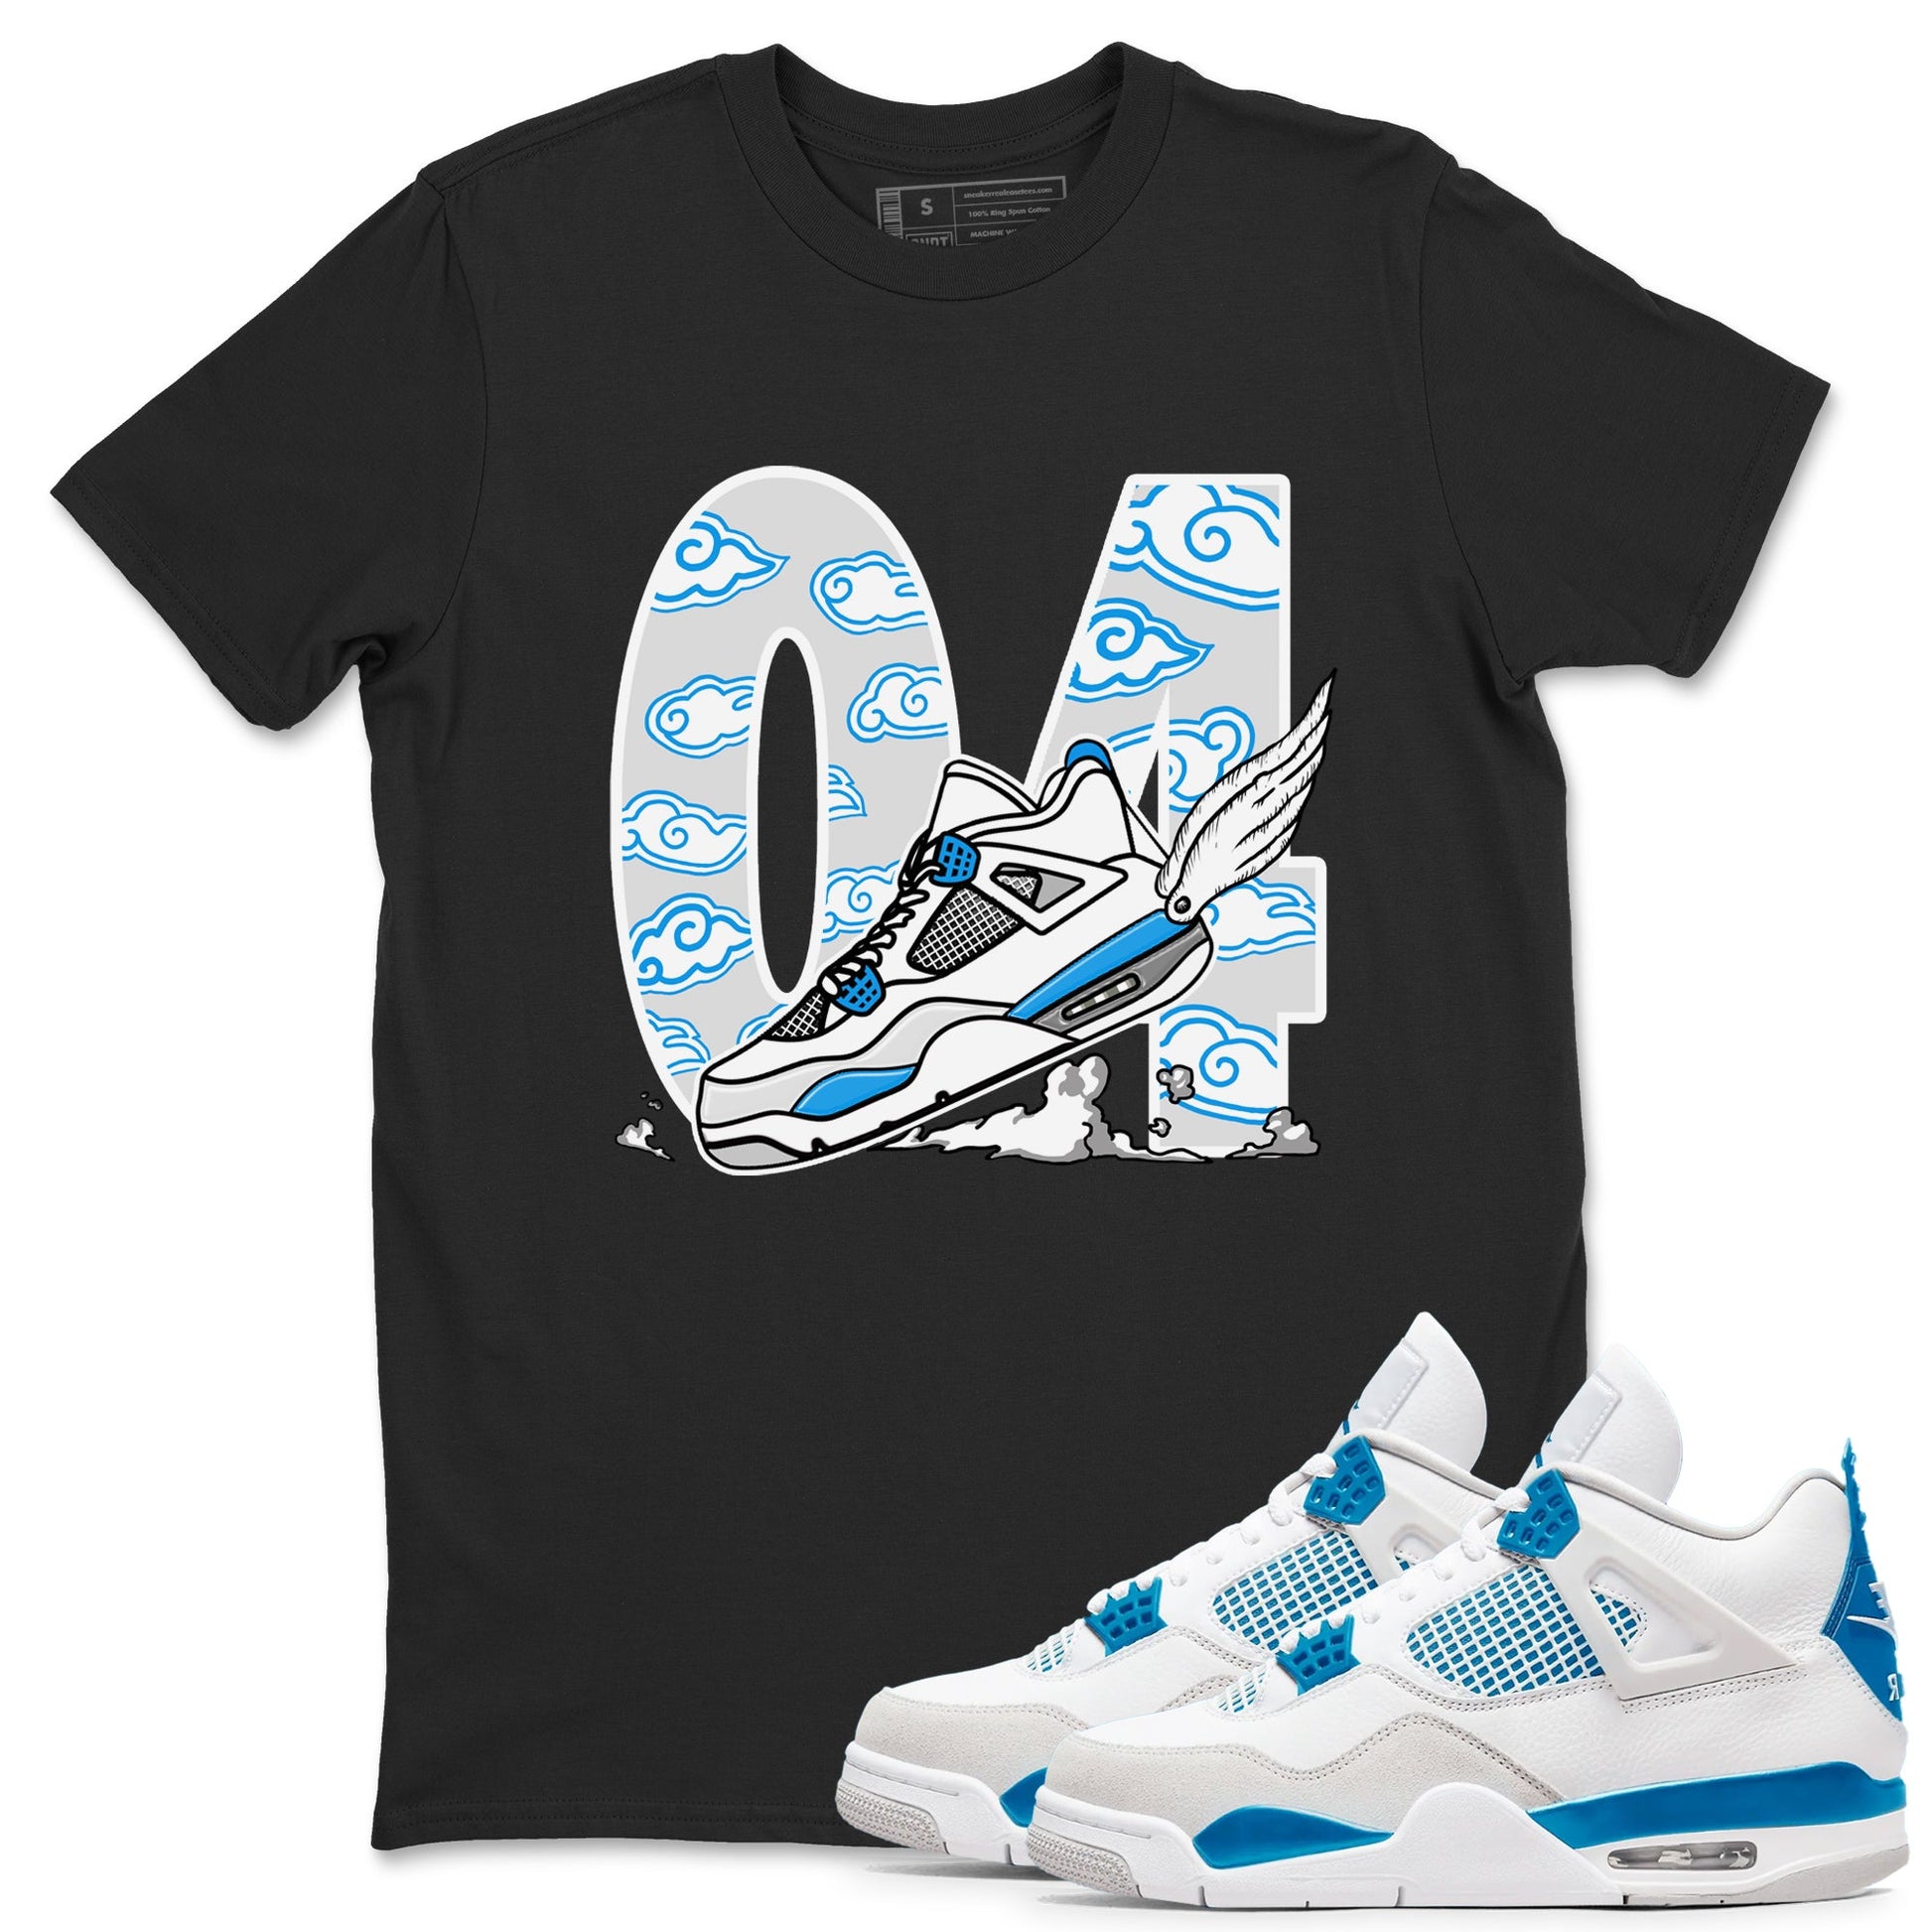 4s Military Blue shirt to match jordans Fly To The Clouds sneaker tees Air Jordan 4 Military Blue SNRT Sneaker Release Tees unisex cotton Black 1 crew neck shirt